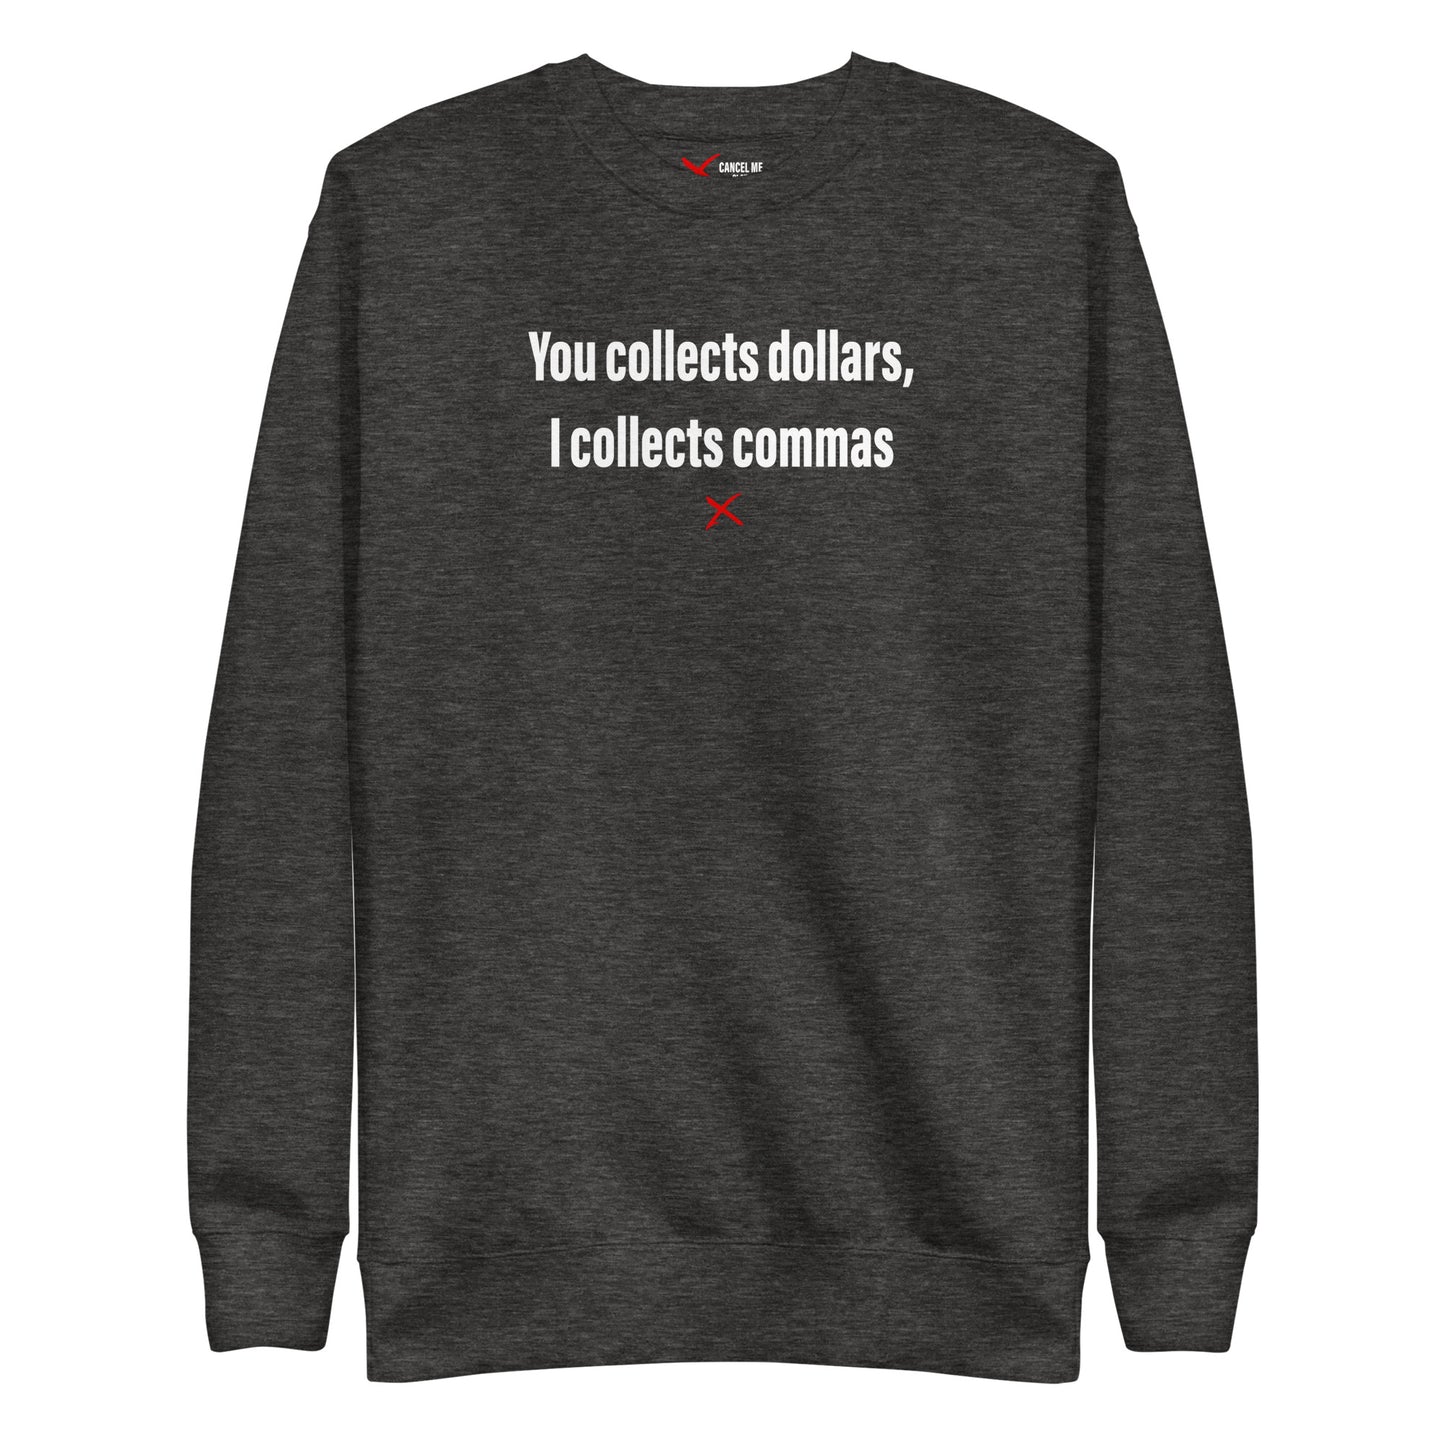 You collects dollars, I collects commas - Sweatshirt